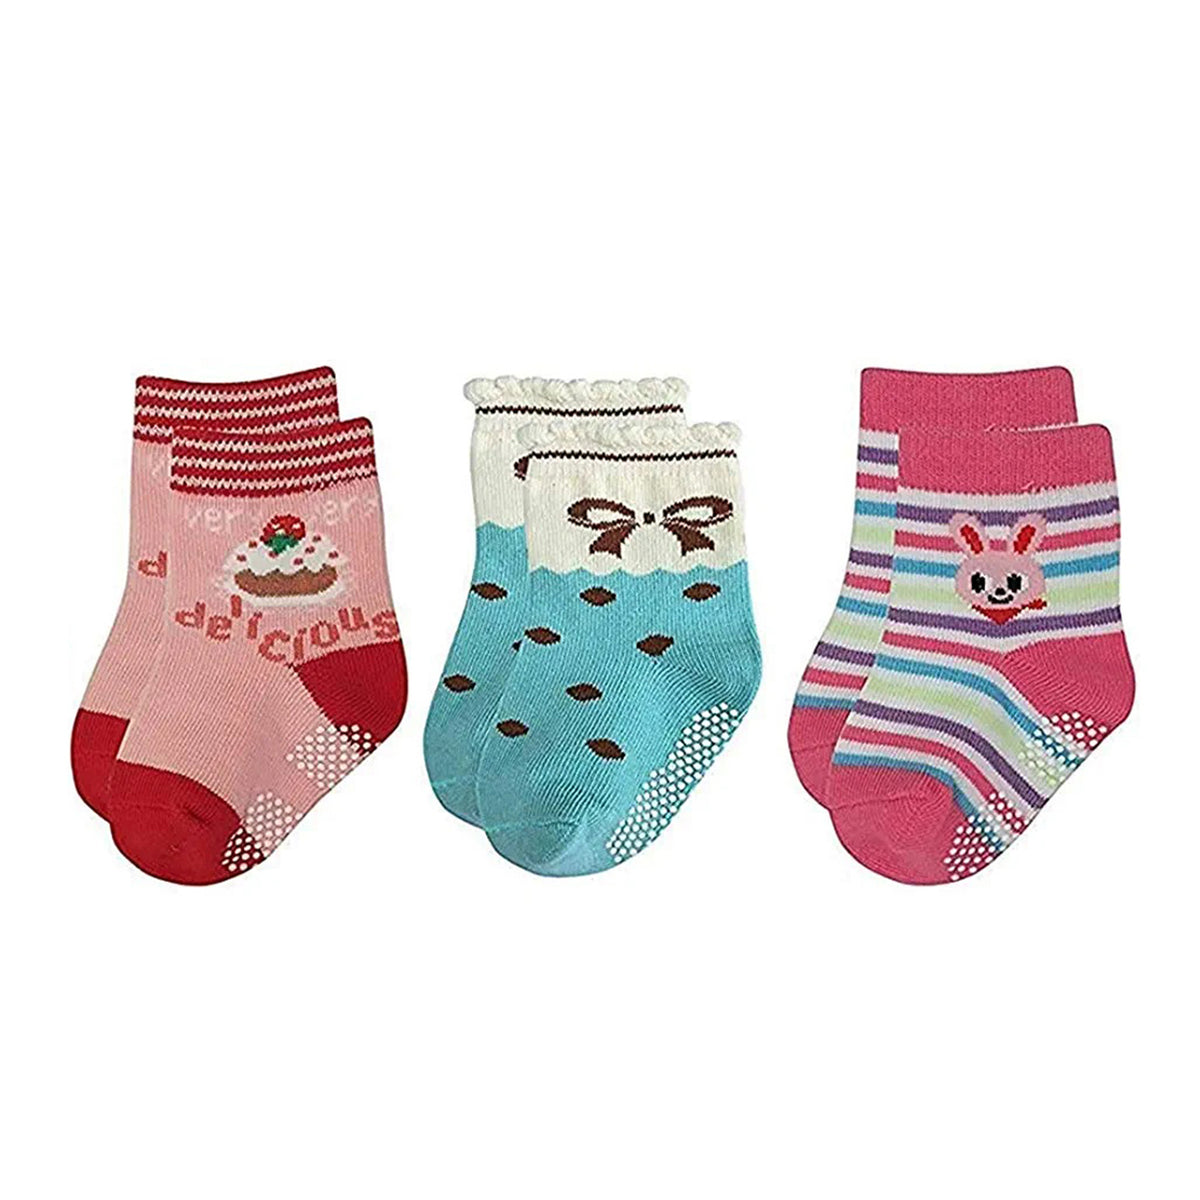 FOOTPRINTS Baby's Organic Cotton Anti-Skid Socks (Multicolour, Mix Designs) - Pack of Any 3 Pairs